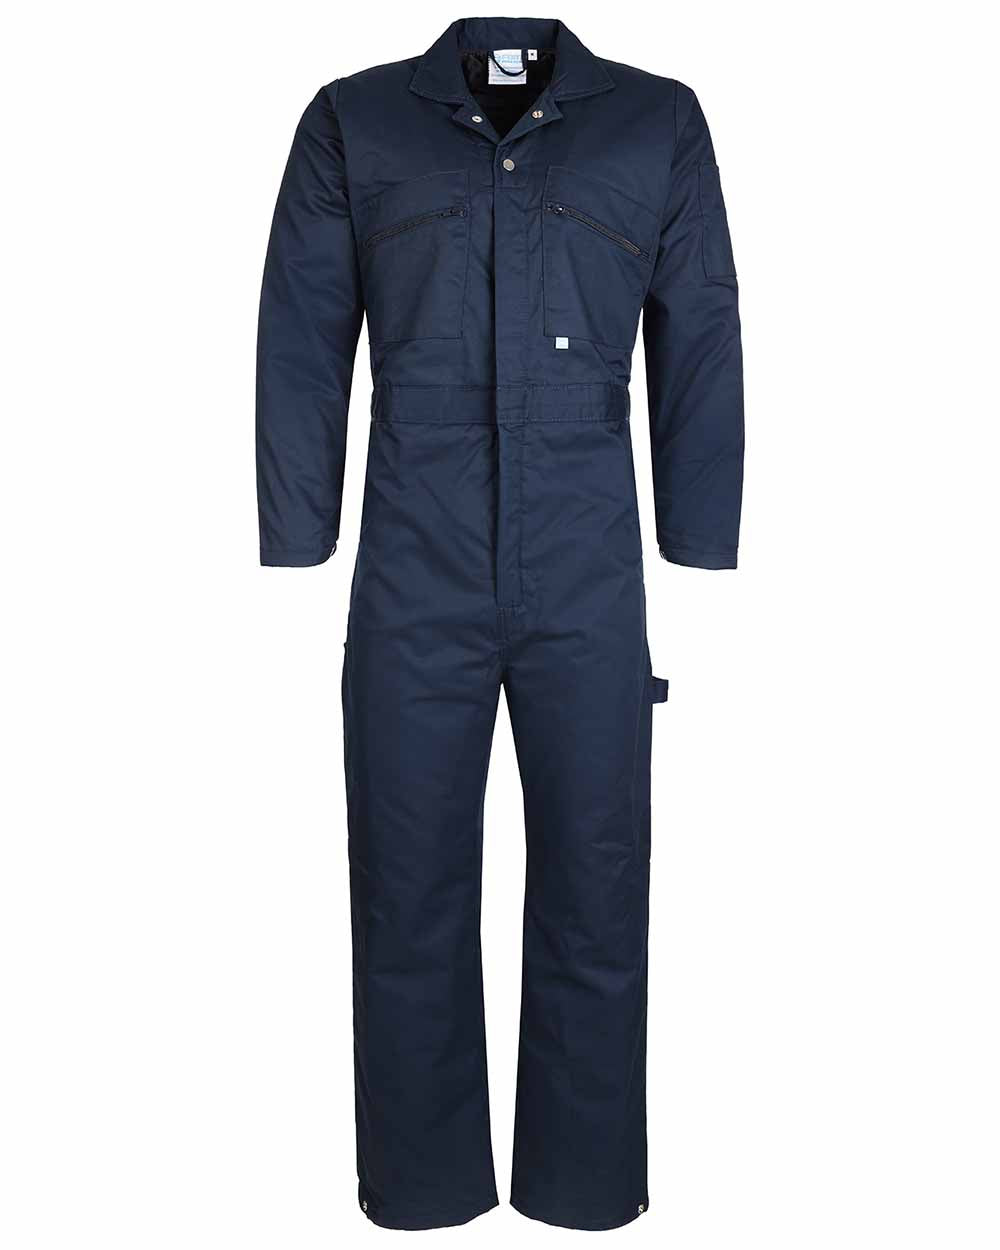 Navy Coloured Fort Quilted Padded Boilersuit On A White Background